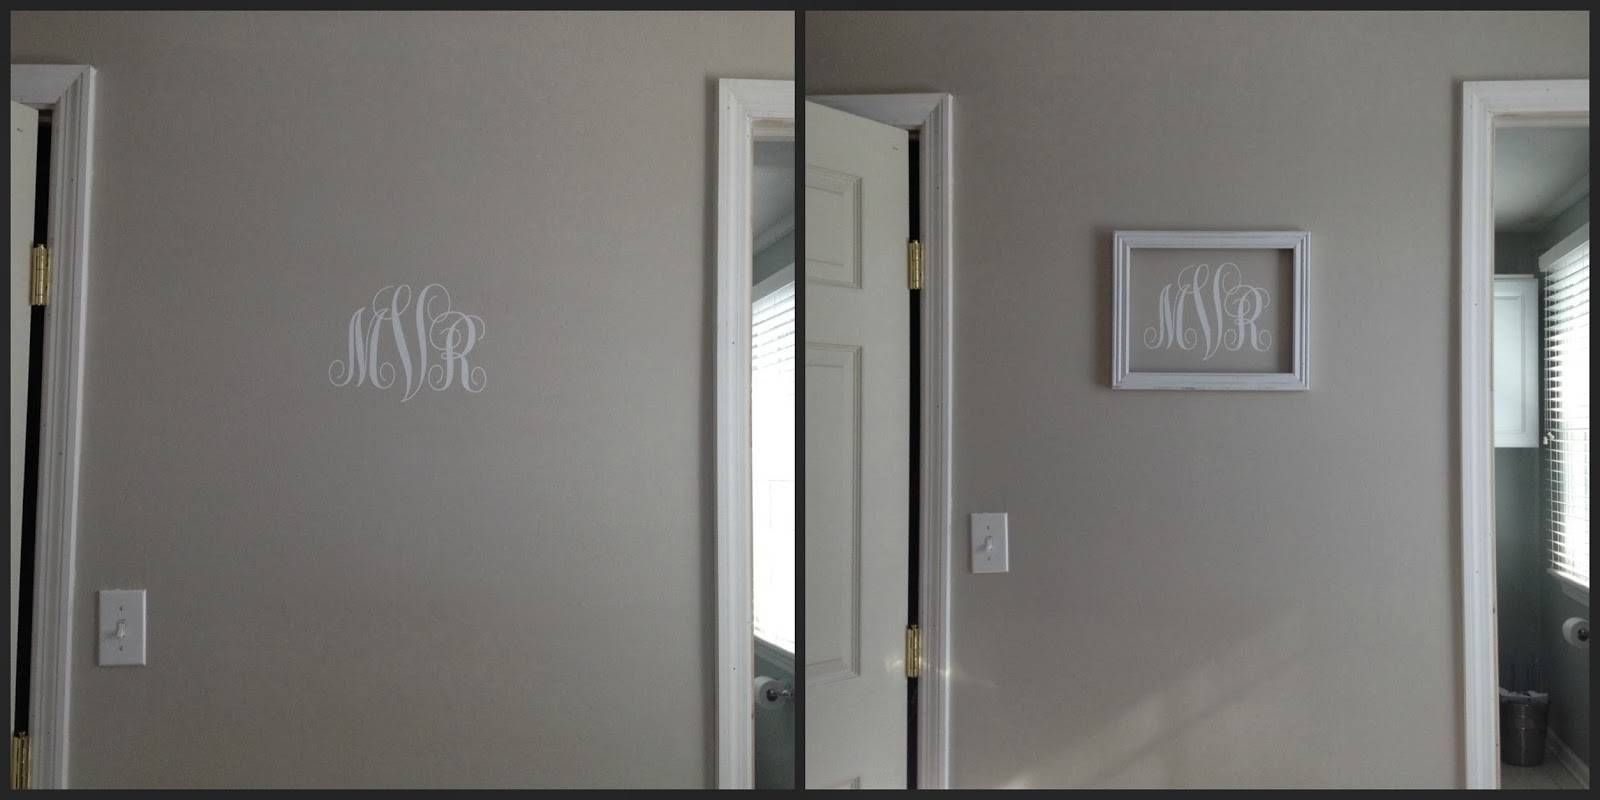 Silhouette} Vinyl Monogram Wall Art – Silhouette School For Most Up To Date Framed Monogram Wall Art (View 11 of 20)